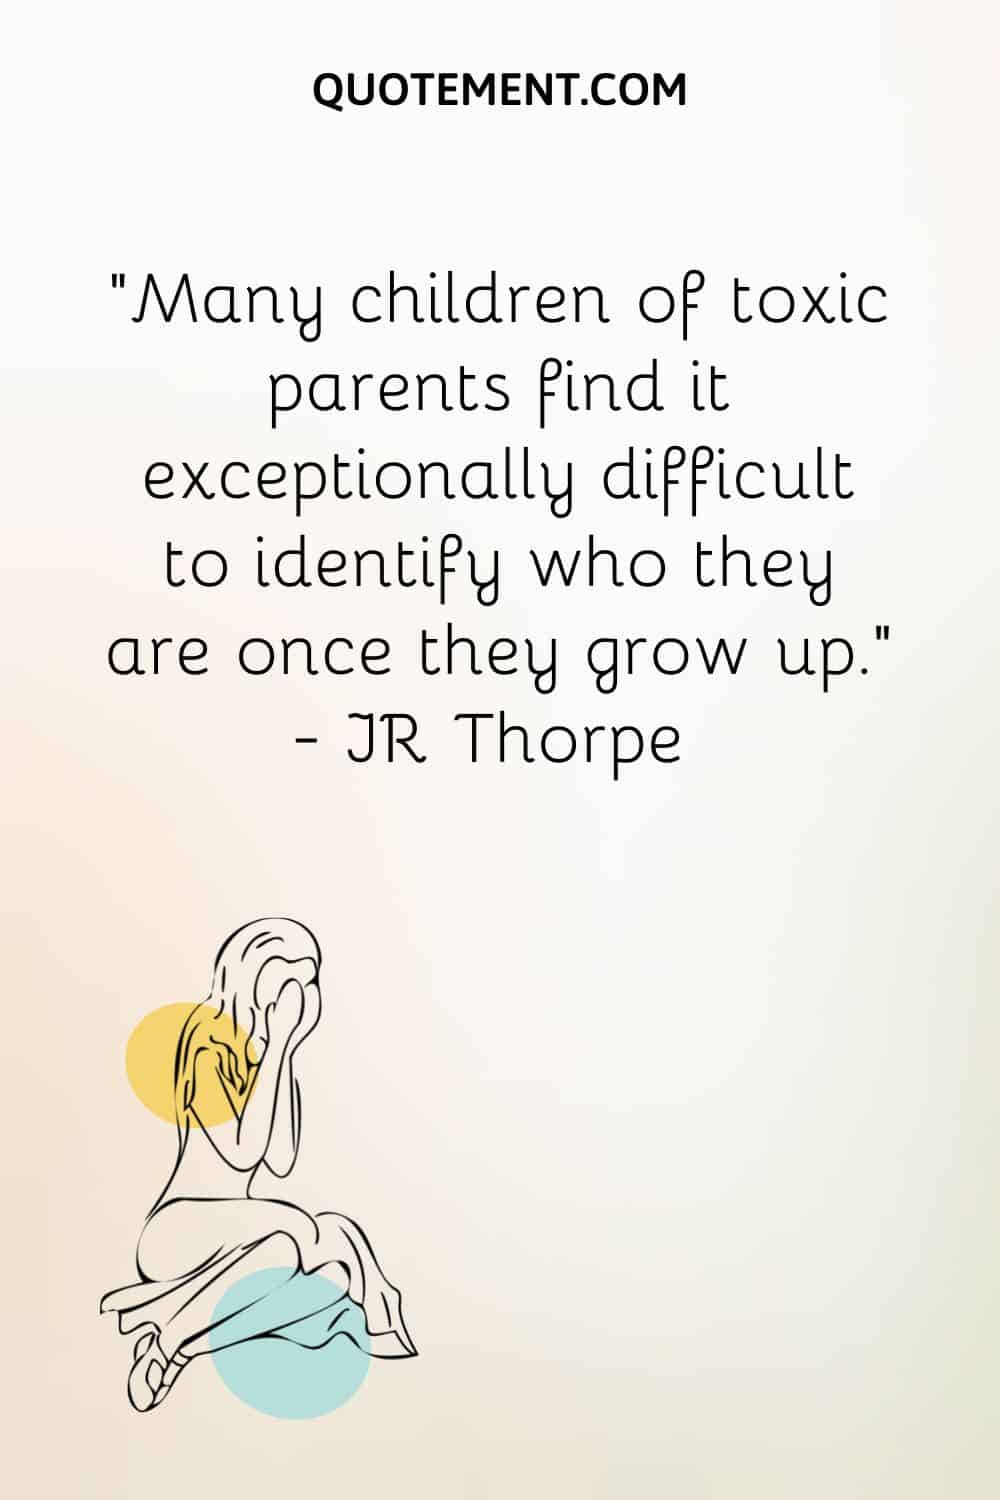 Many children of toxic parents find it exceptionally difficult to identify who they are once they grow up